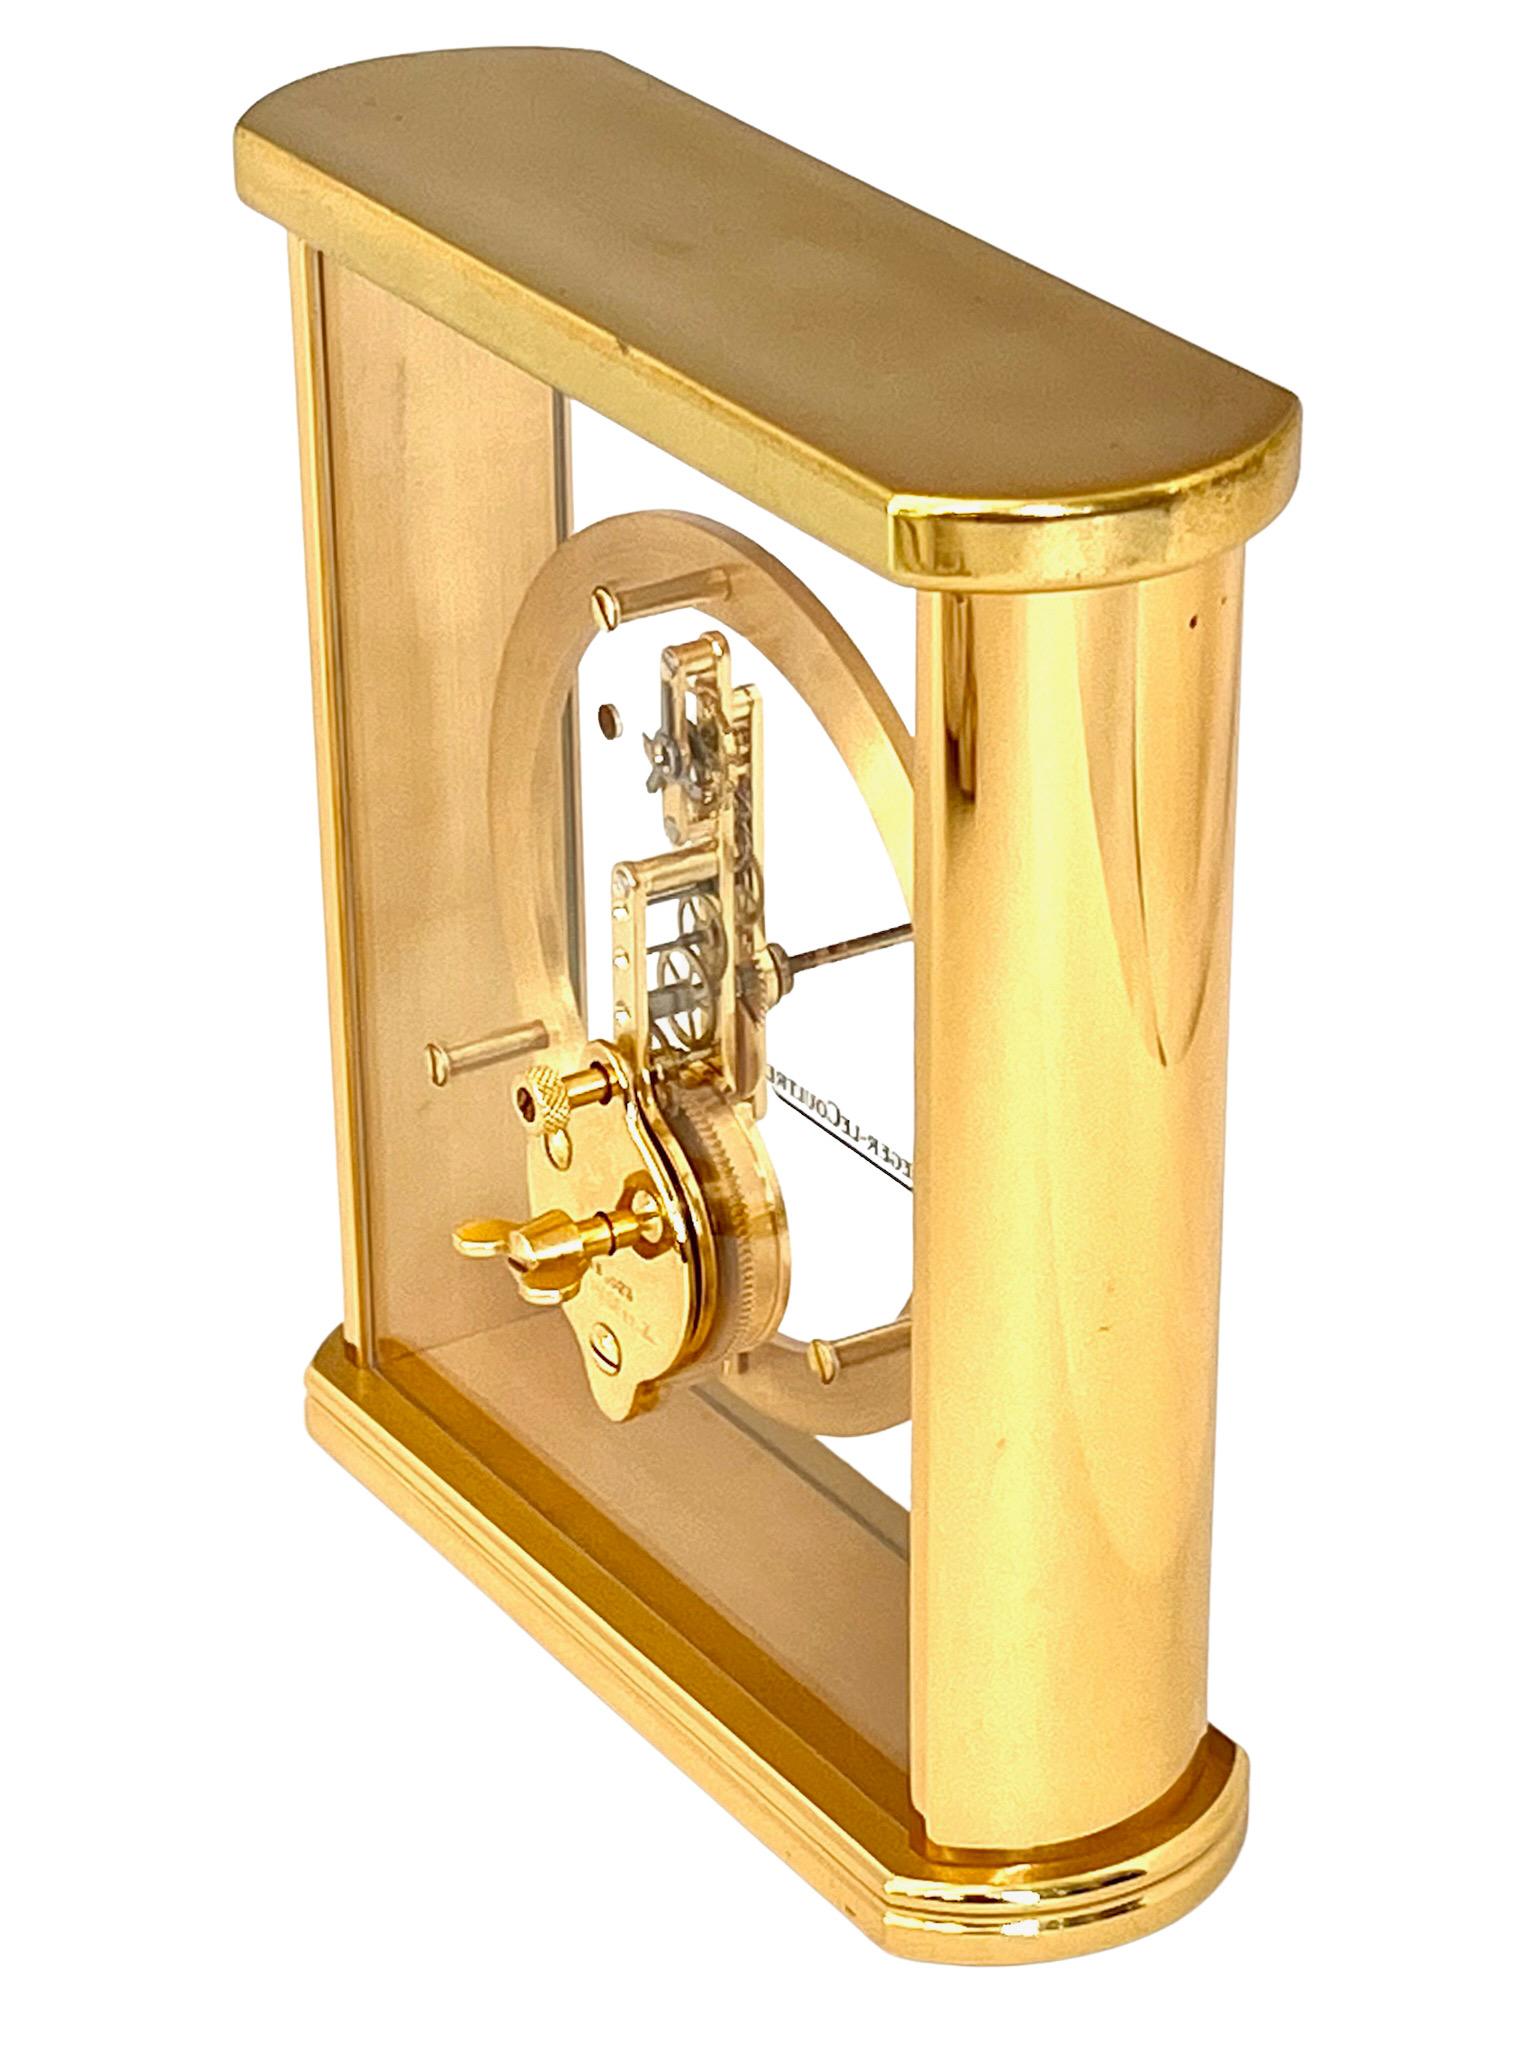 Polished Jaeger LeCoultre Brass and Glass Skeleton Mantel Clock